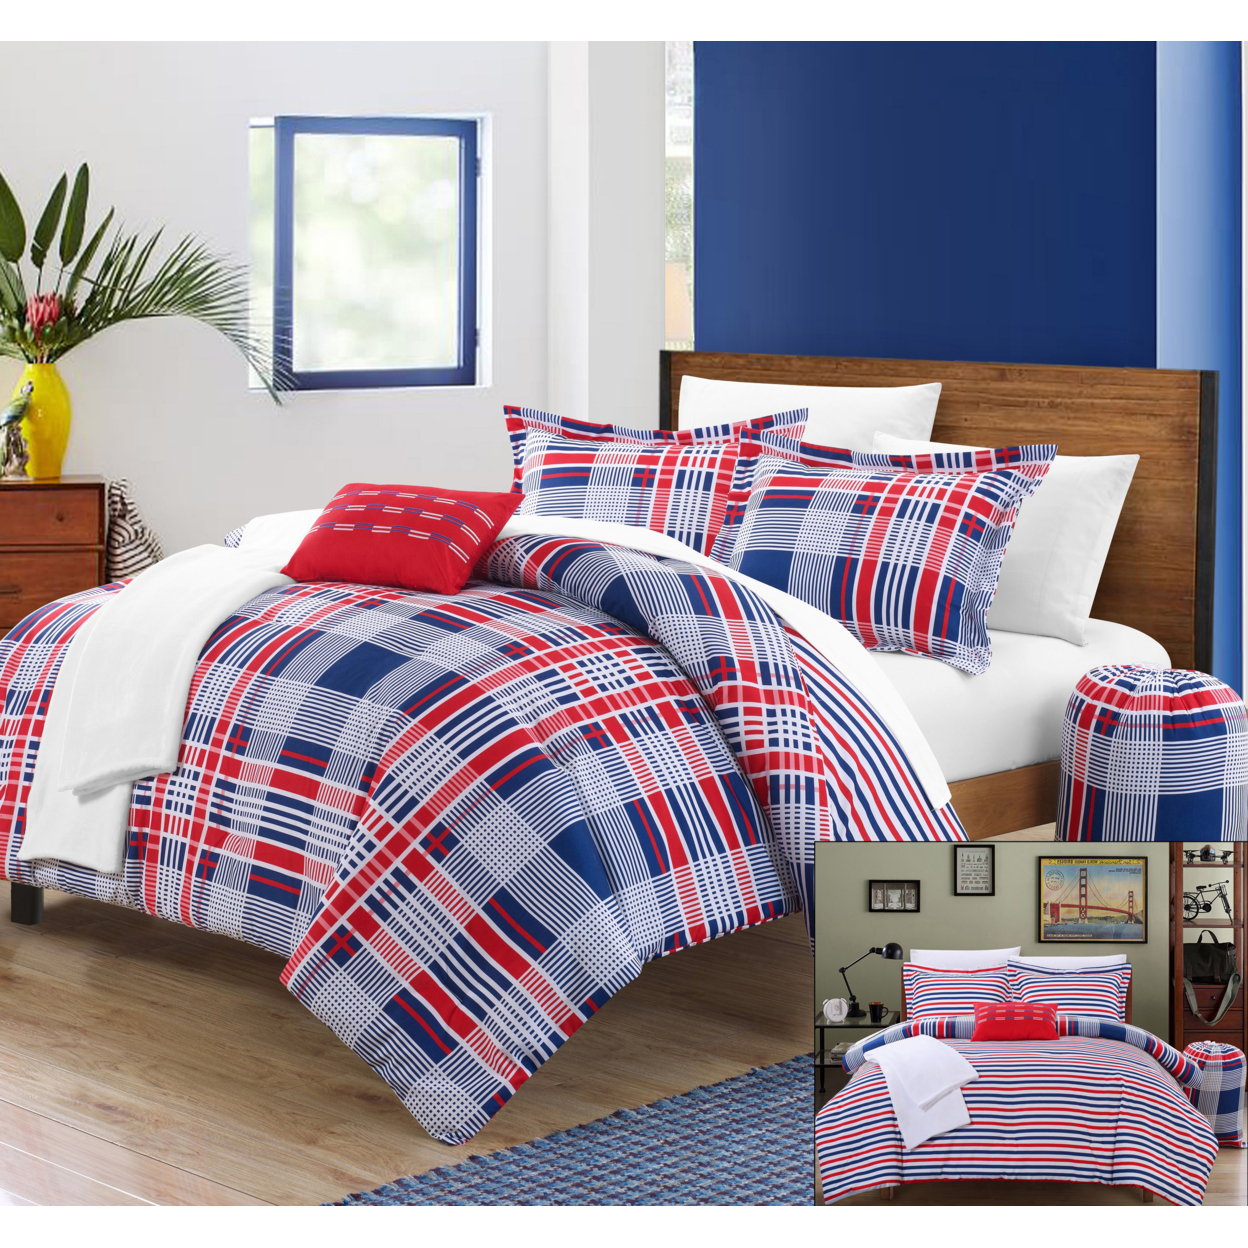 Chic Home 8/10 Piece Rochester Super Soft Microfiber Plaid Printed REVERSIBLE Bed In A Bag Comforter Set - Red, Full